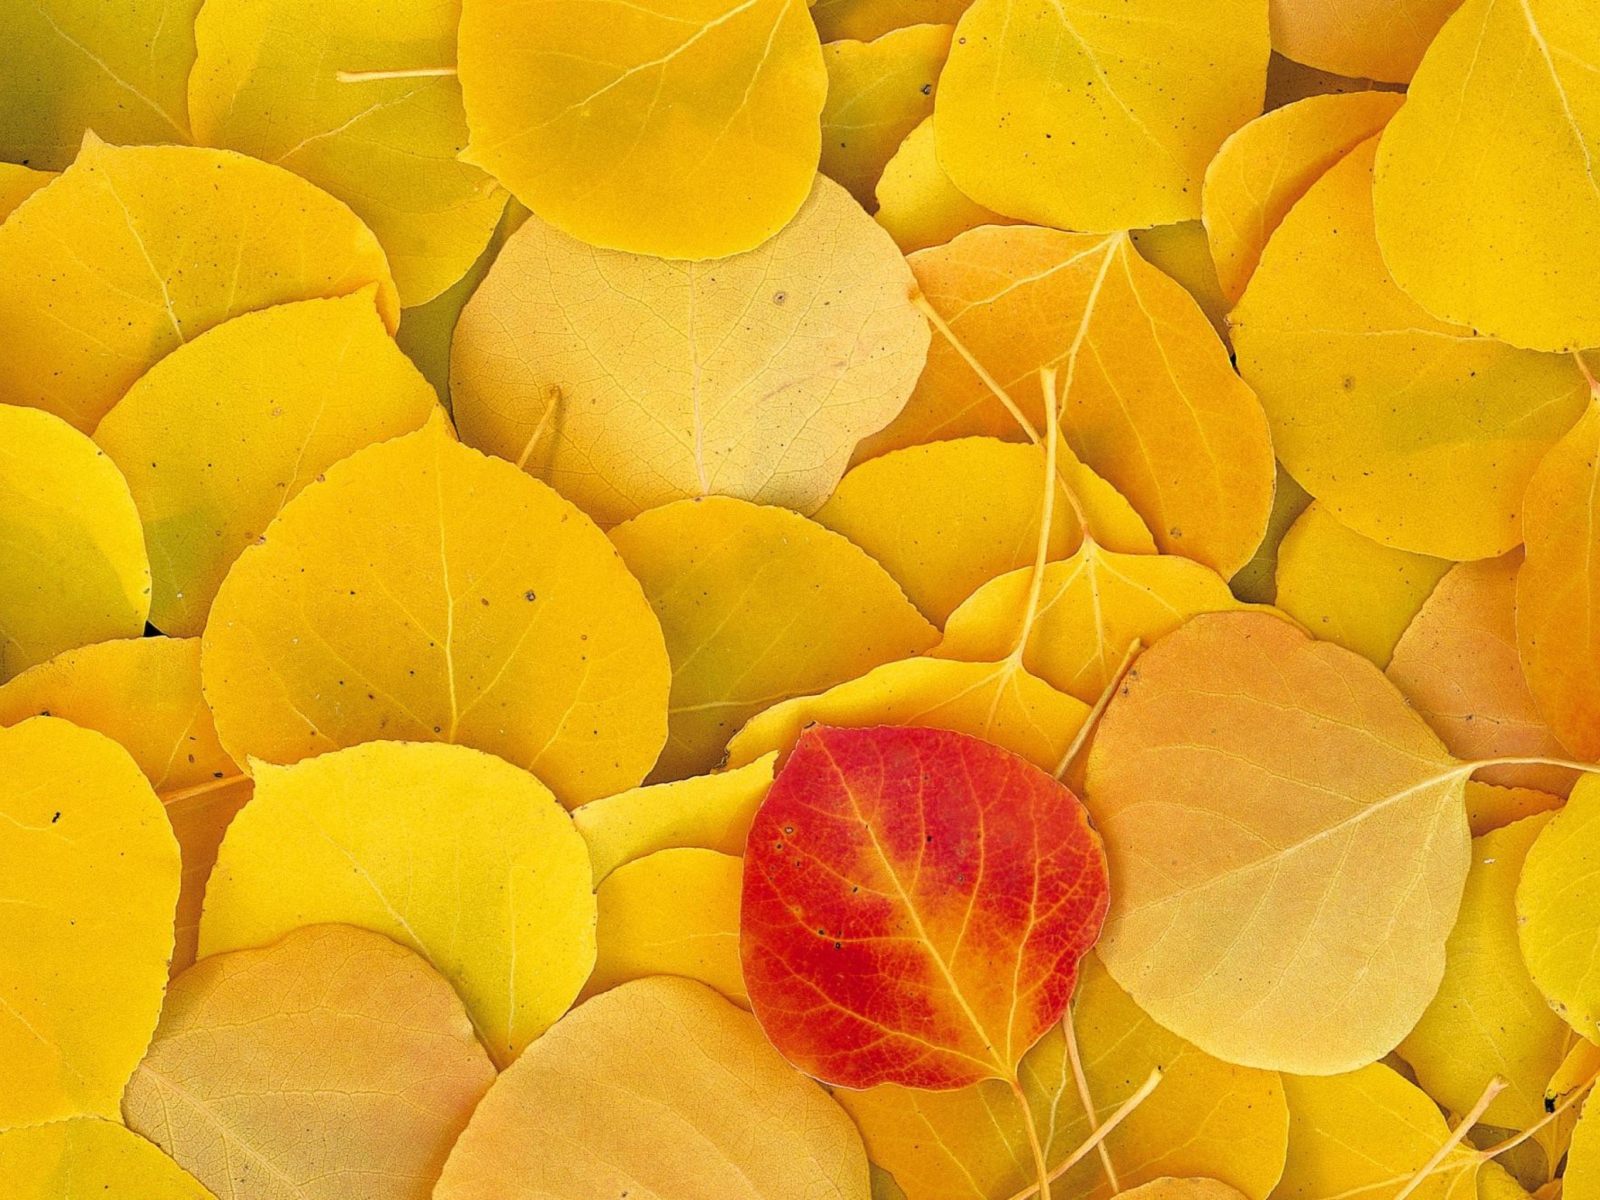 Red Leaf On Yellow Leaves wallpaper 1600x1200